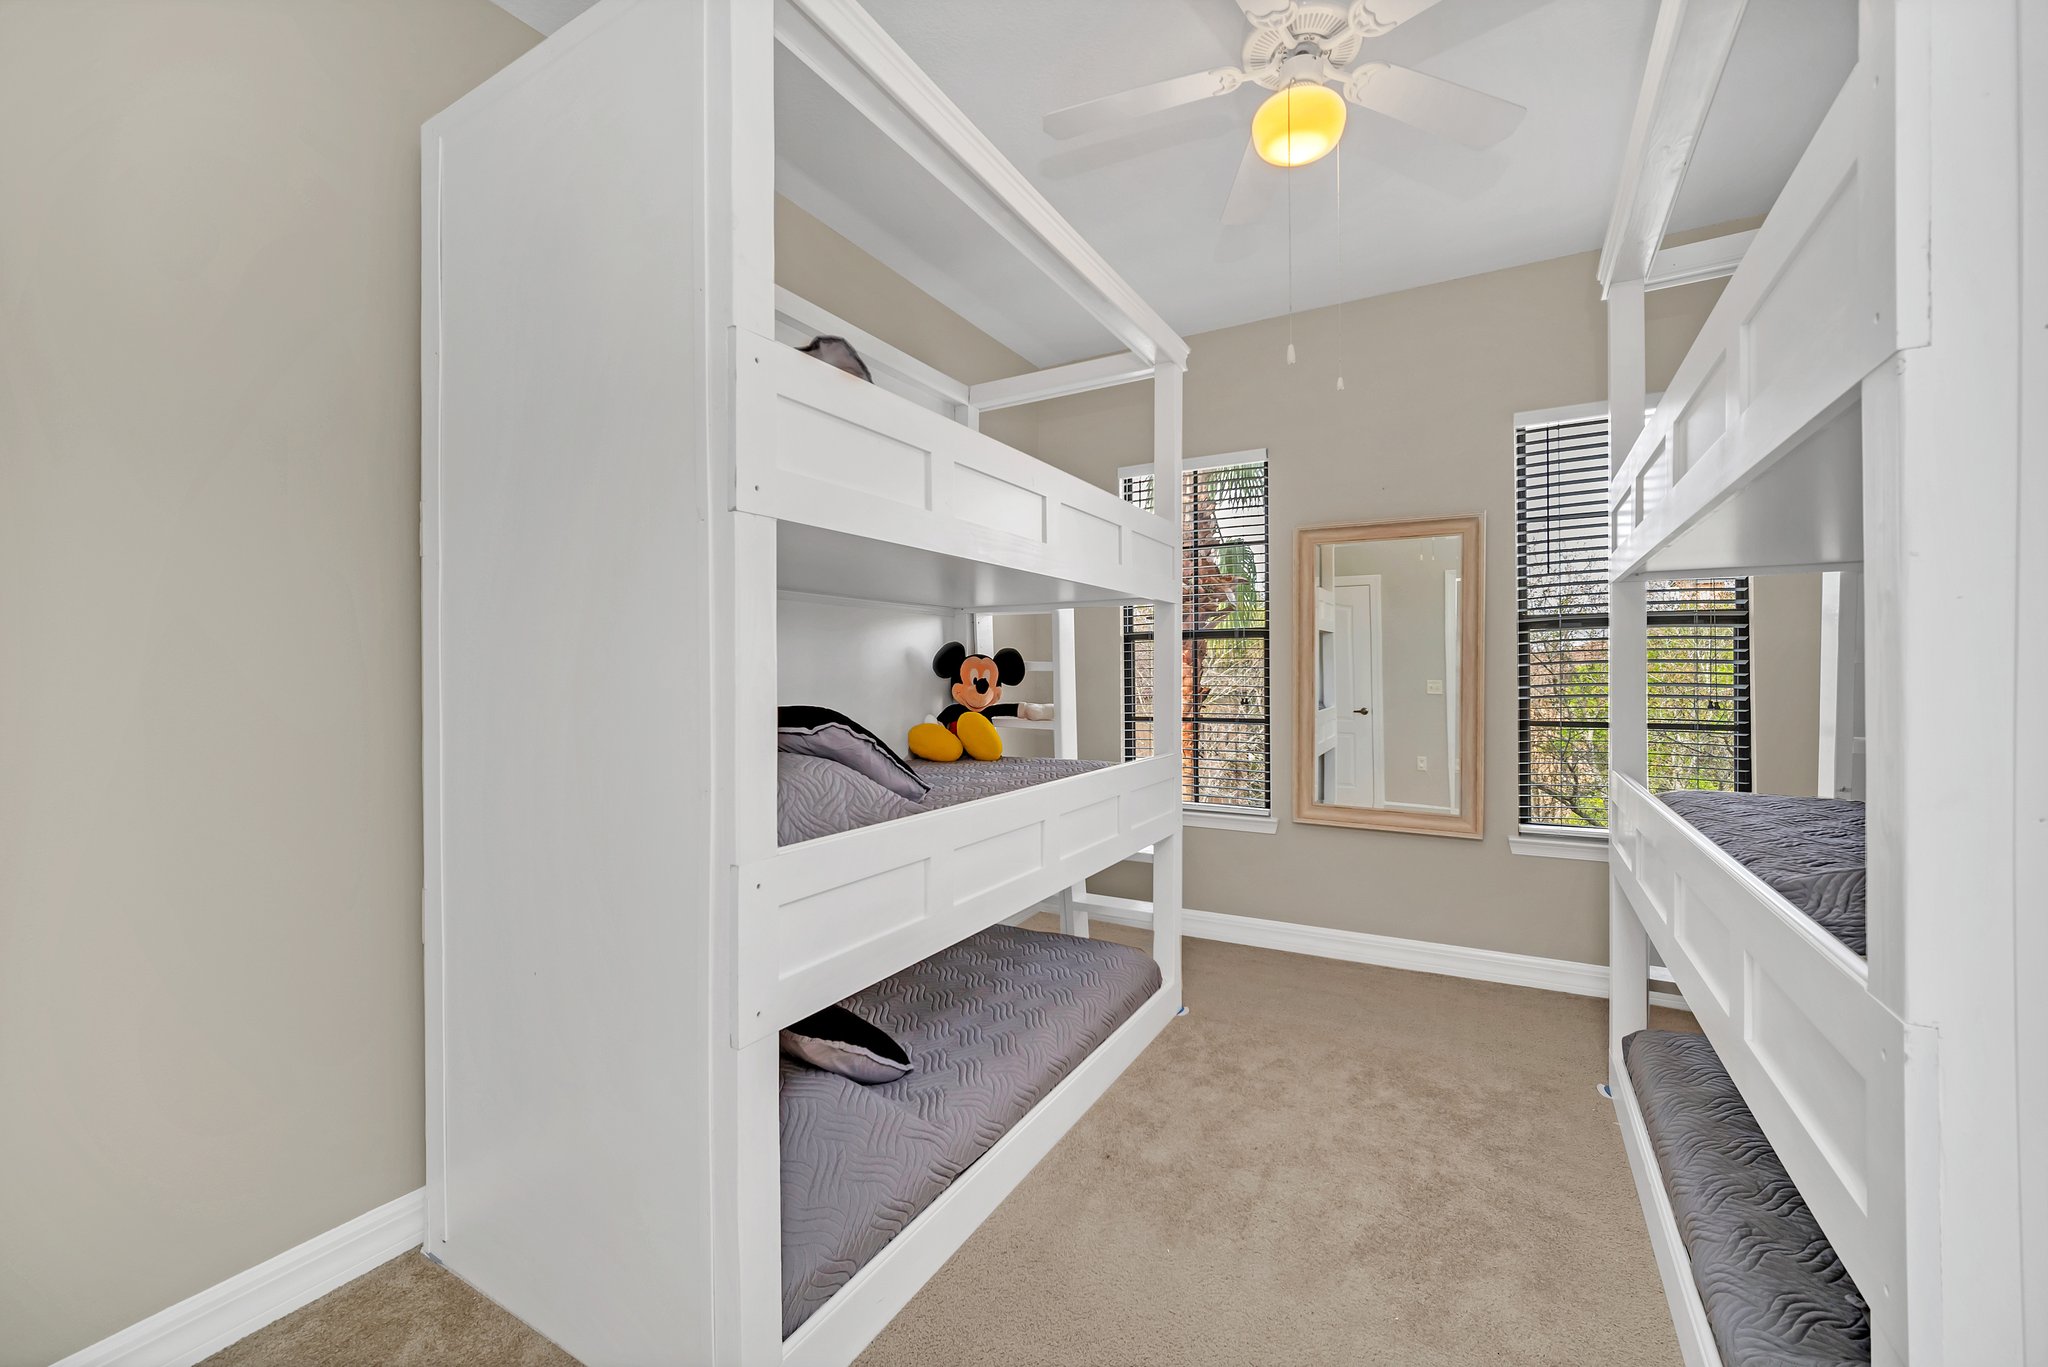 2nd bedroom. Bunks optional - seller can remove or leave them at your request